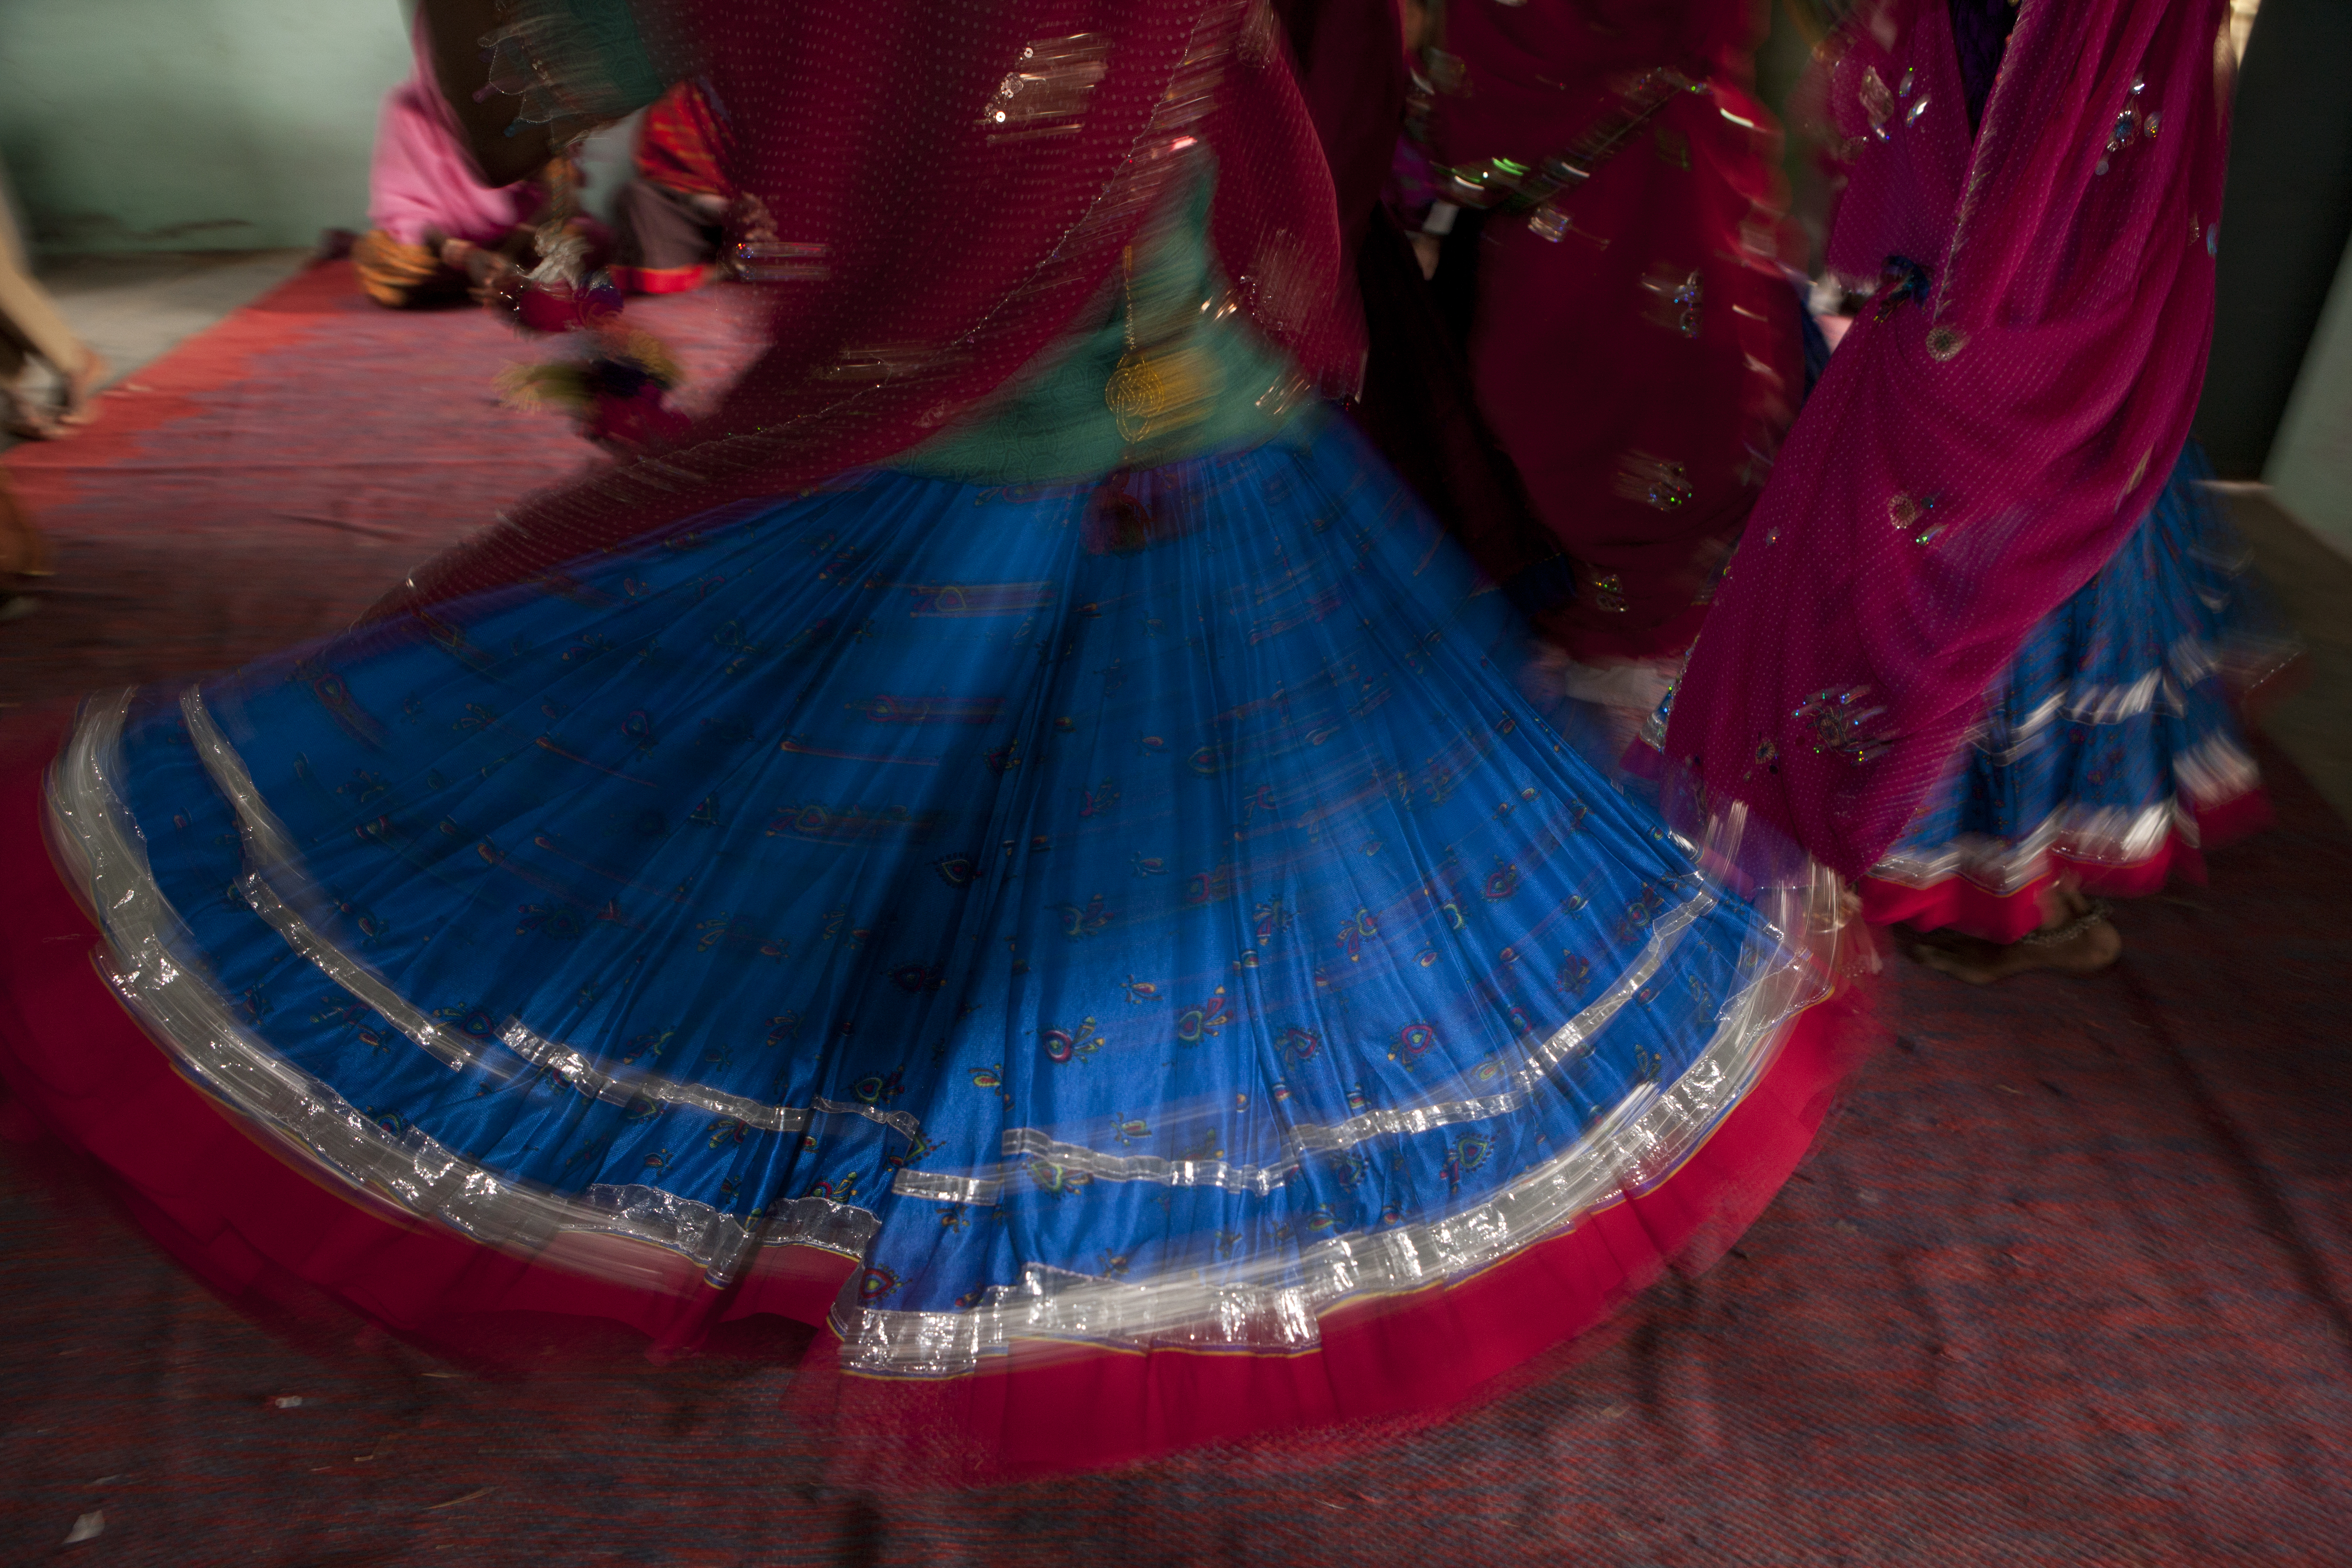 Traditional Rajasthani Skirts swirling at a celebration by Mark Tuschman